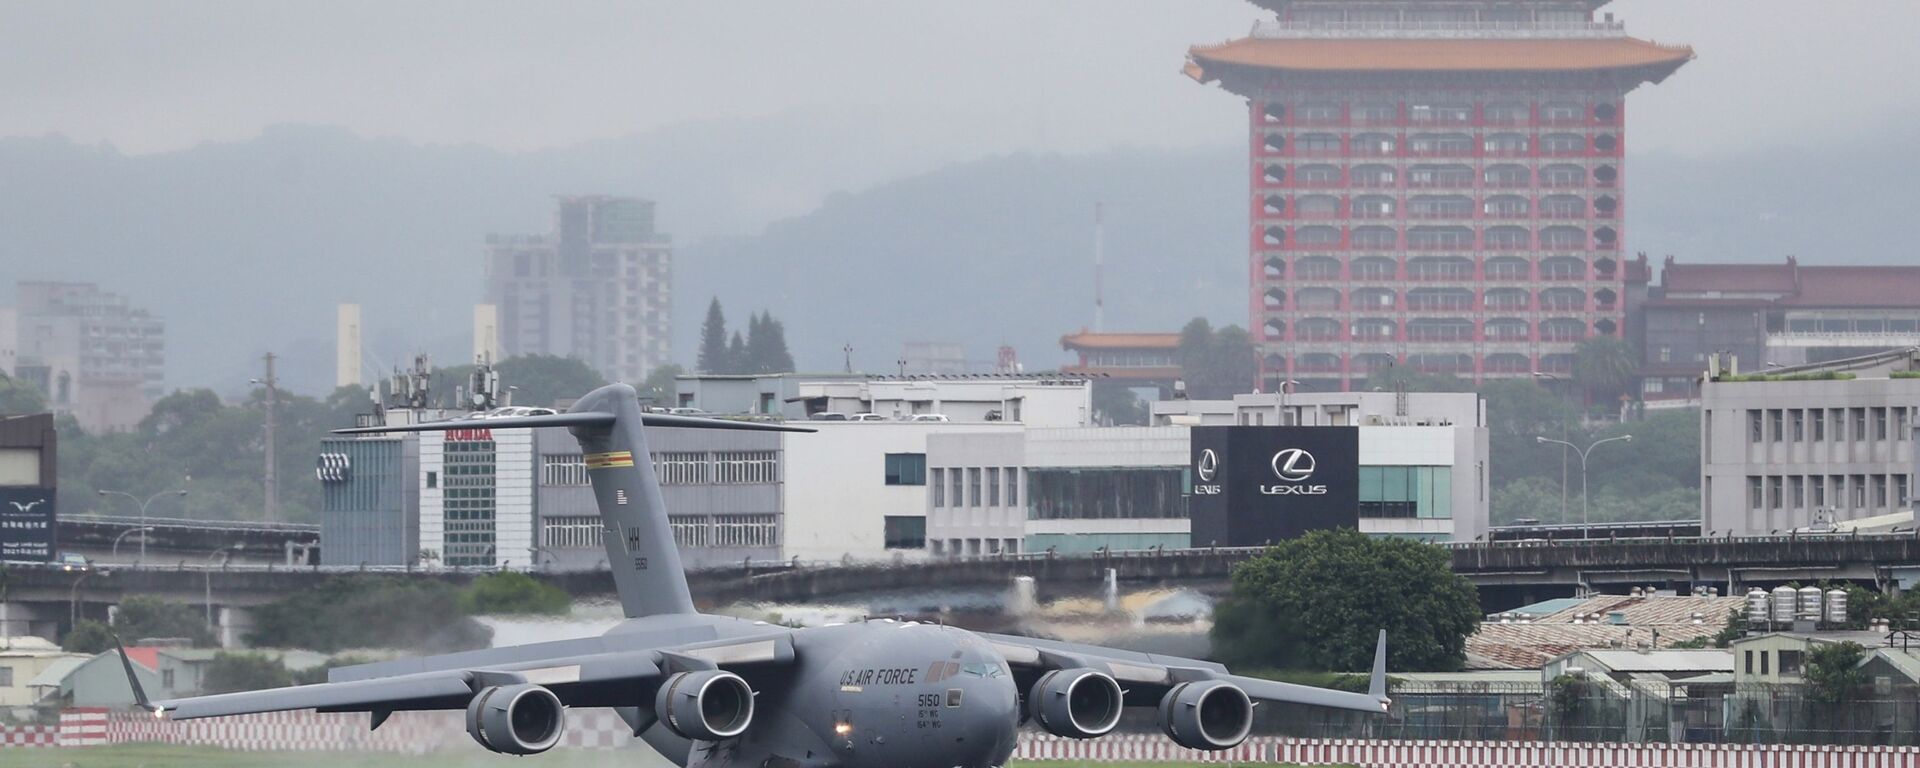 A U.S. military aircraft carrying a group of U.S. senators arrives at the Songshan Airport in Taipei, Taiwan on Sunday, June 6, 2021 - Sputnik International, 1920, 09.11.2021